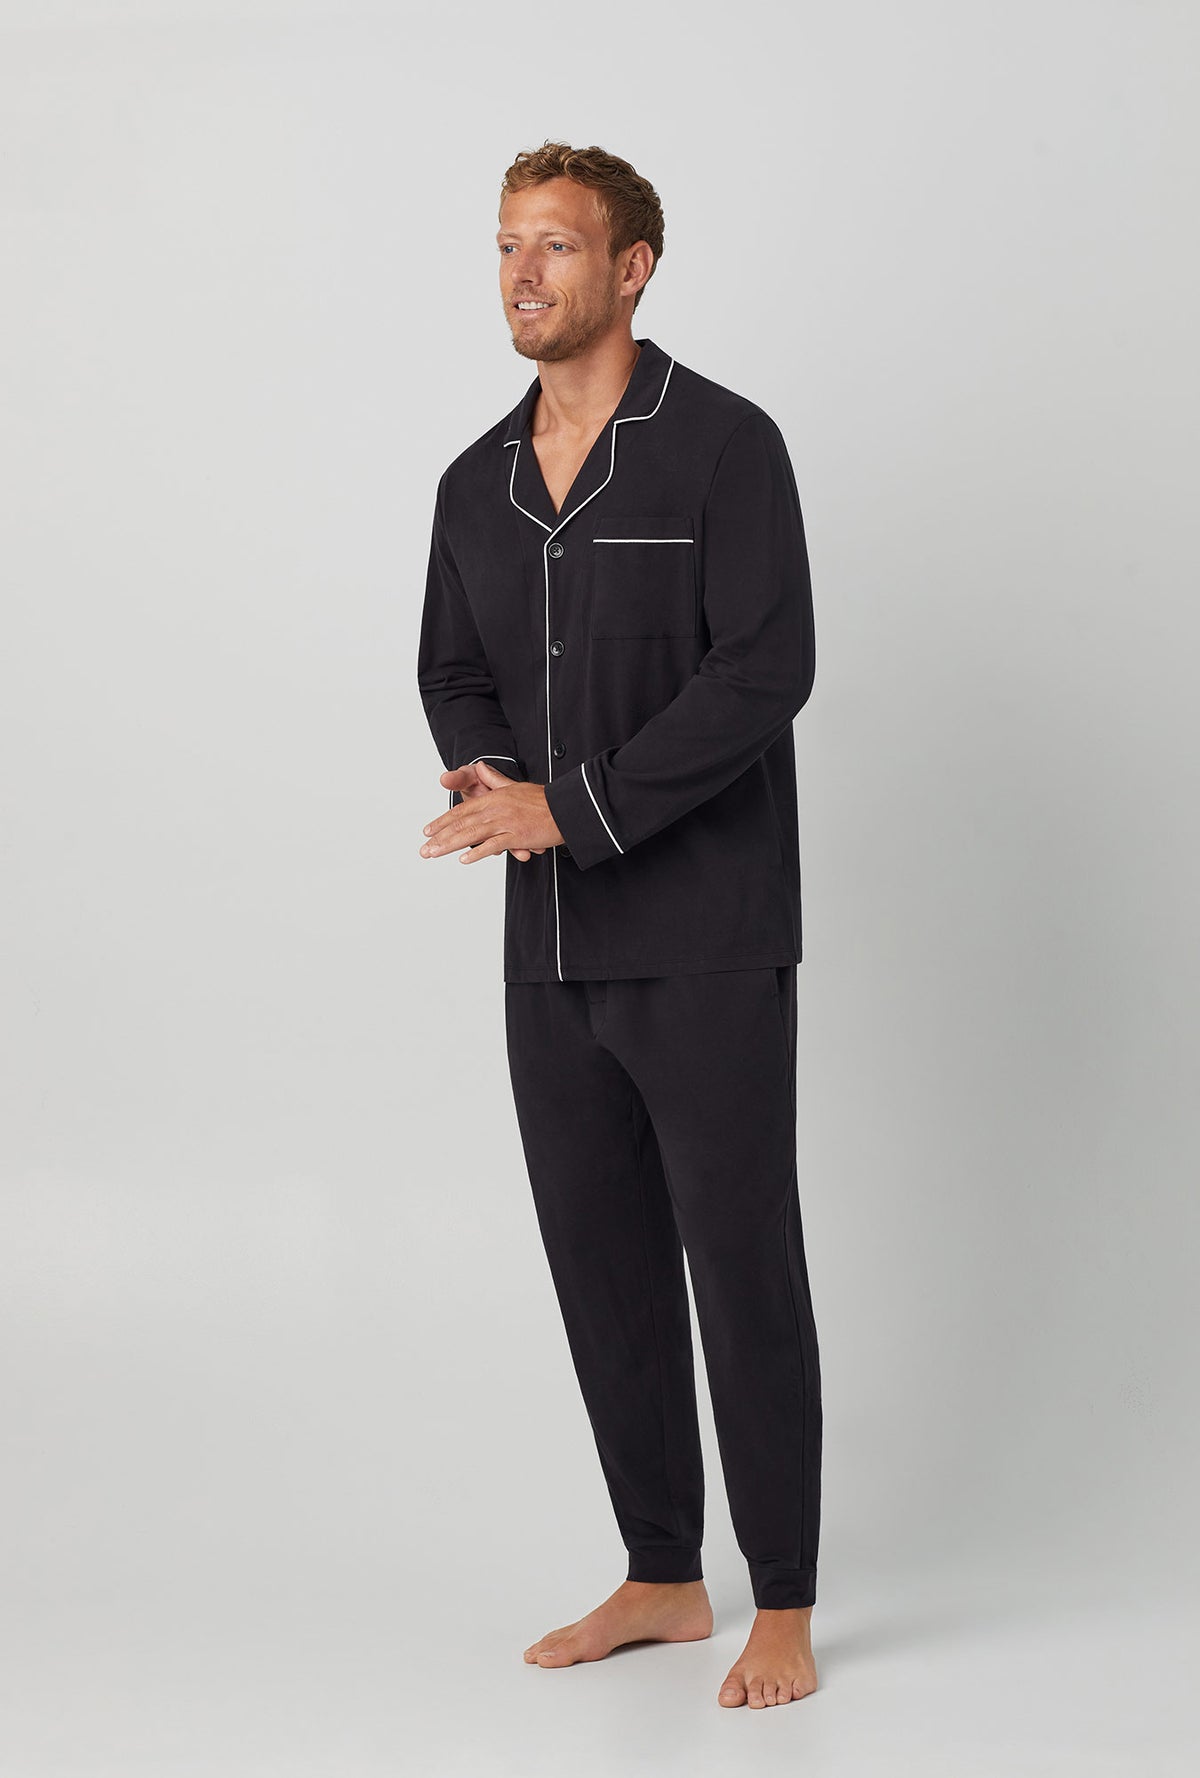 A men wearing  Long Sleeve and Jogger Stretch Jersey PJ Set with Black Beauty print